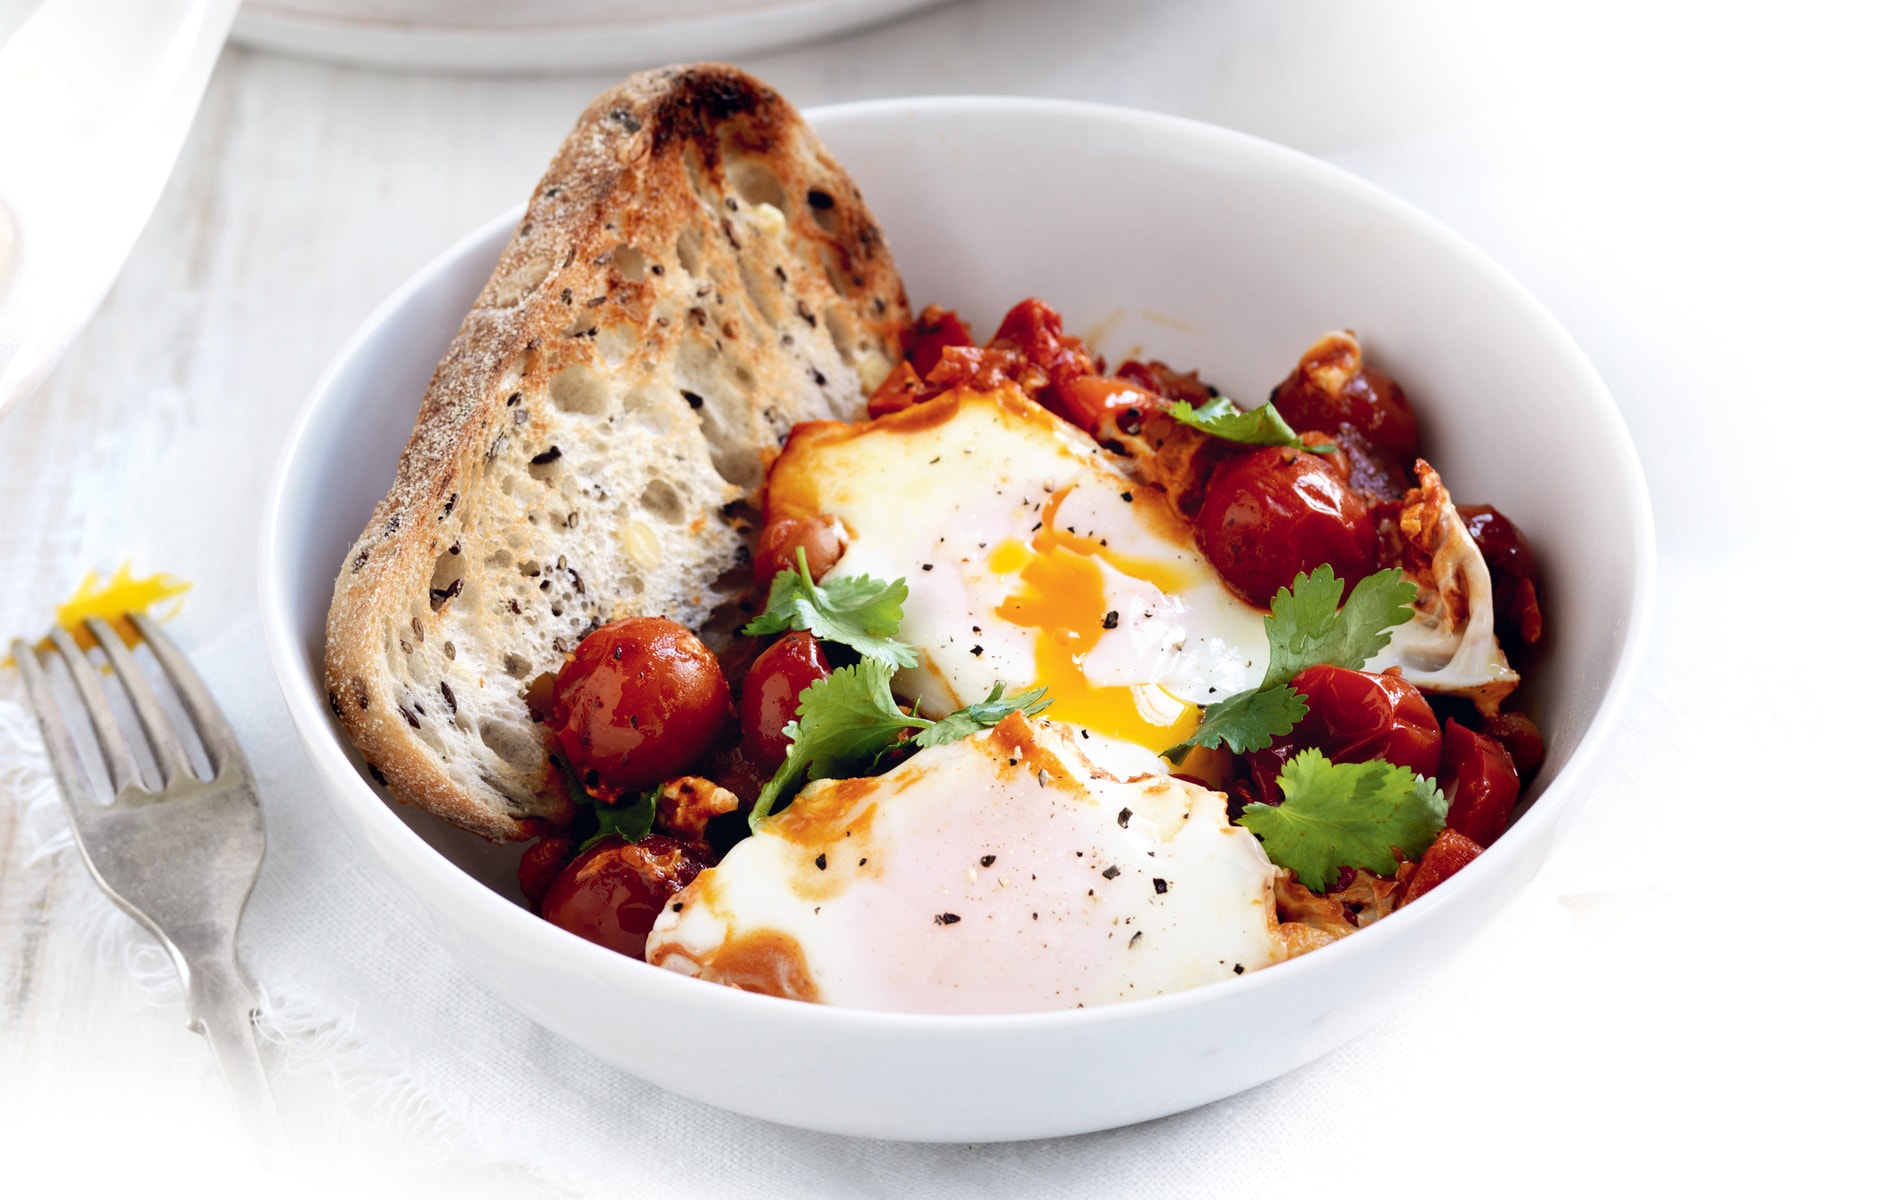 https://media.healthyfood.com/wp-content/uploads/2016/09/Moroccan-spiced-eggs.jpg